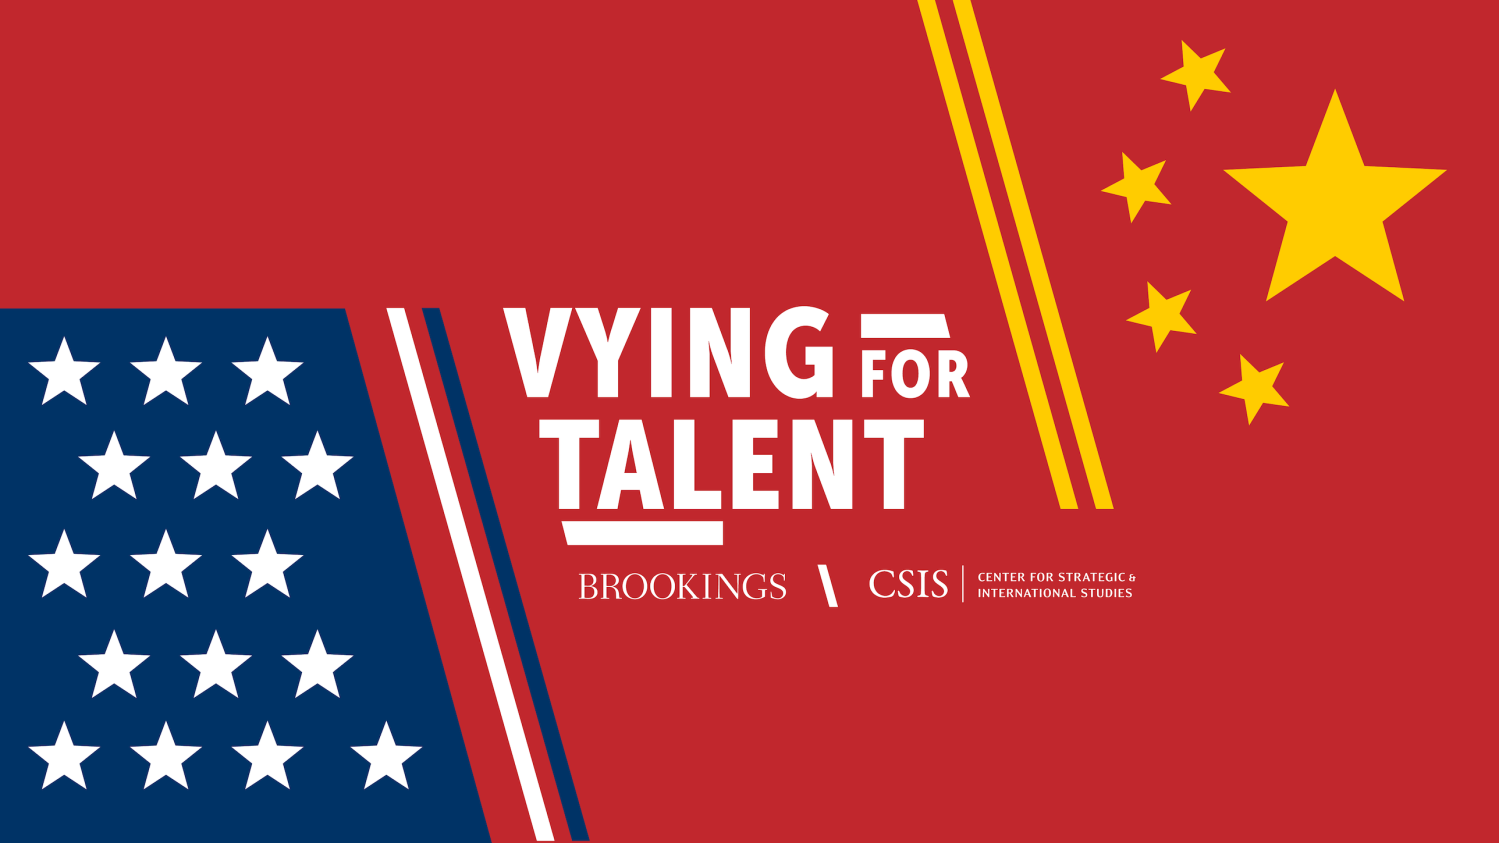 Vying for Talent banner